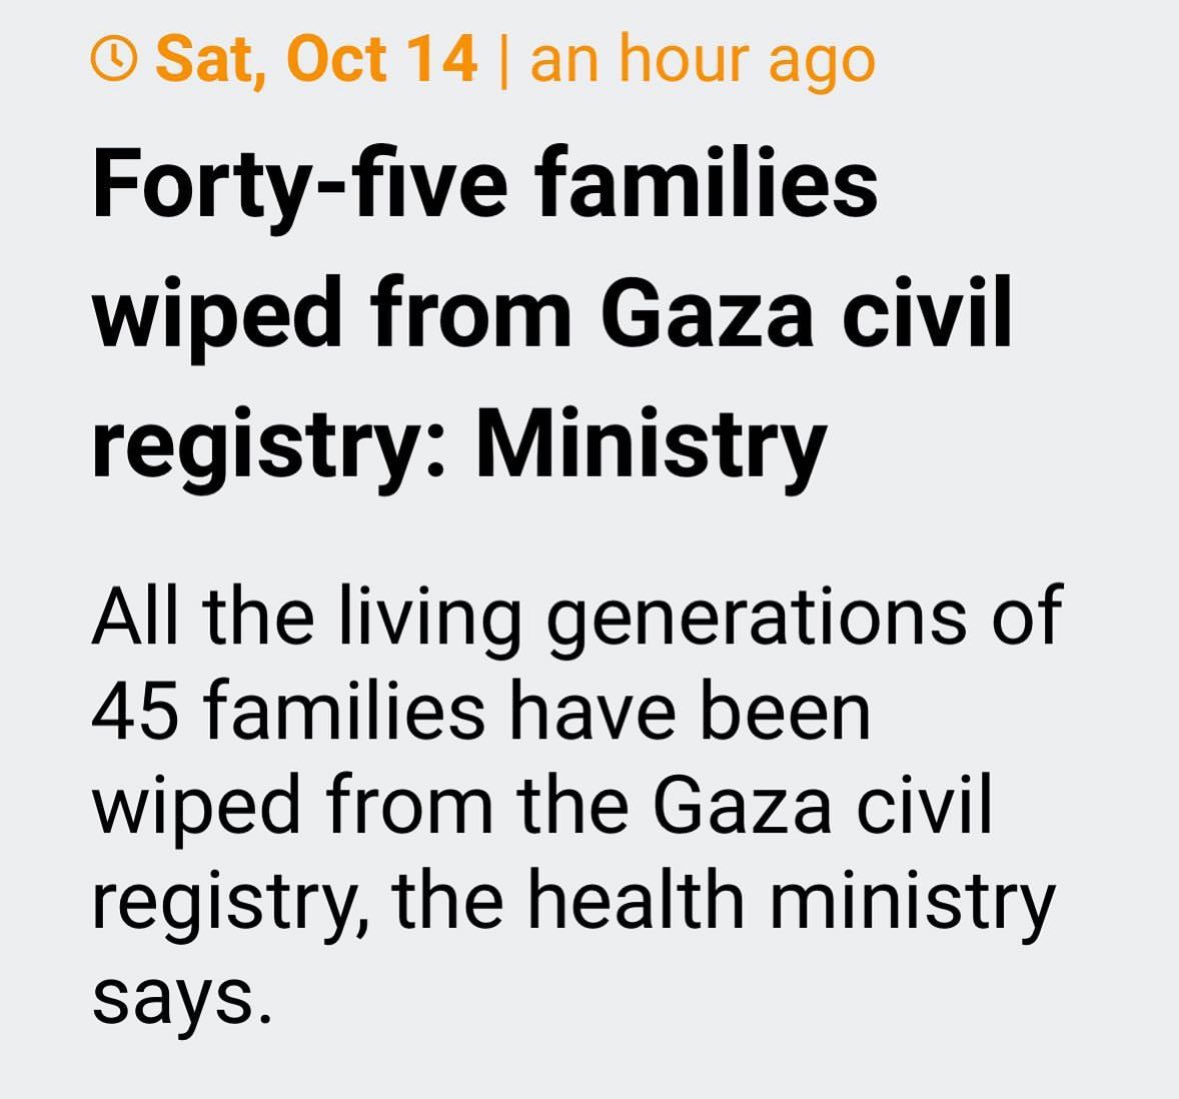 This is called #genocide. #Isreal is a #terrorist country. They wiped away 45 families. First they took away their homes and now whole families. 

لاَّ إِلَـهَ إِلاَّ أَنتَ سُبْحَـنَكَ إِنِّى كُنتُ مِنَ الظَّـلِمِينَ

#Gazagenocide #SaveGaza #kidsofgaza 
#IsrealPalestine #Hamas